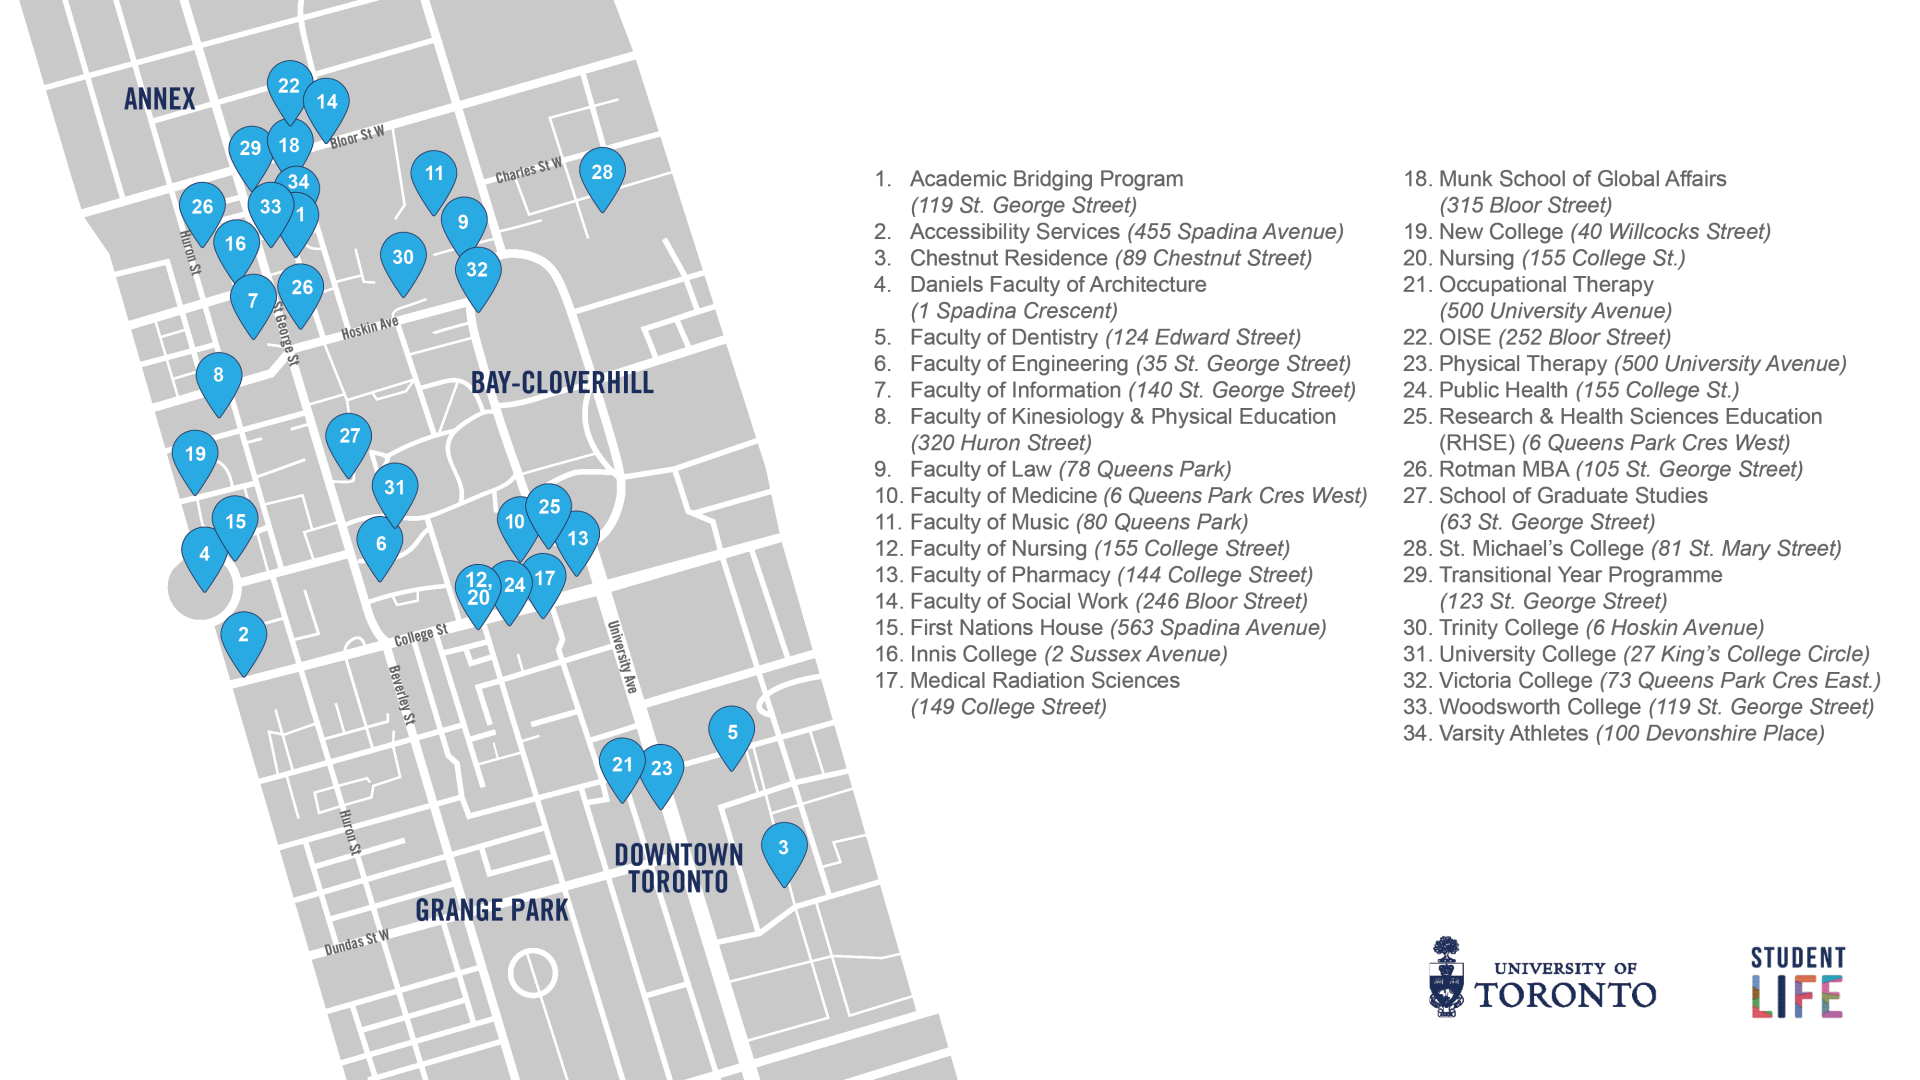 Map showing location of all on-location services for Student Life